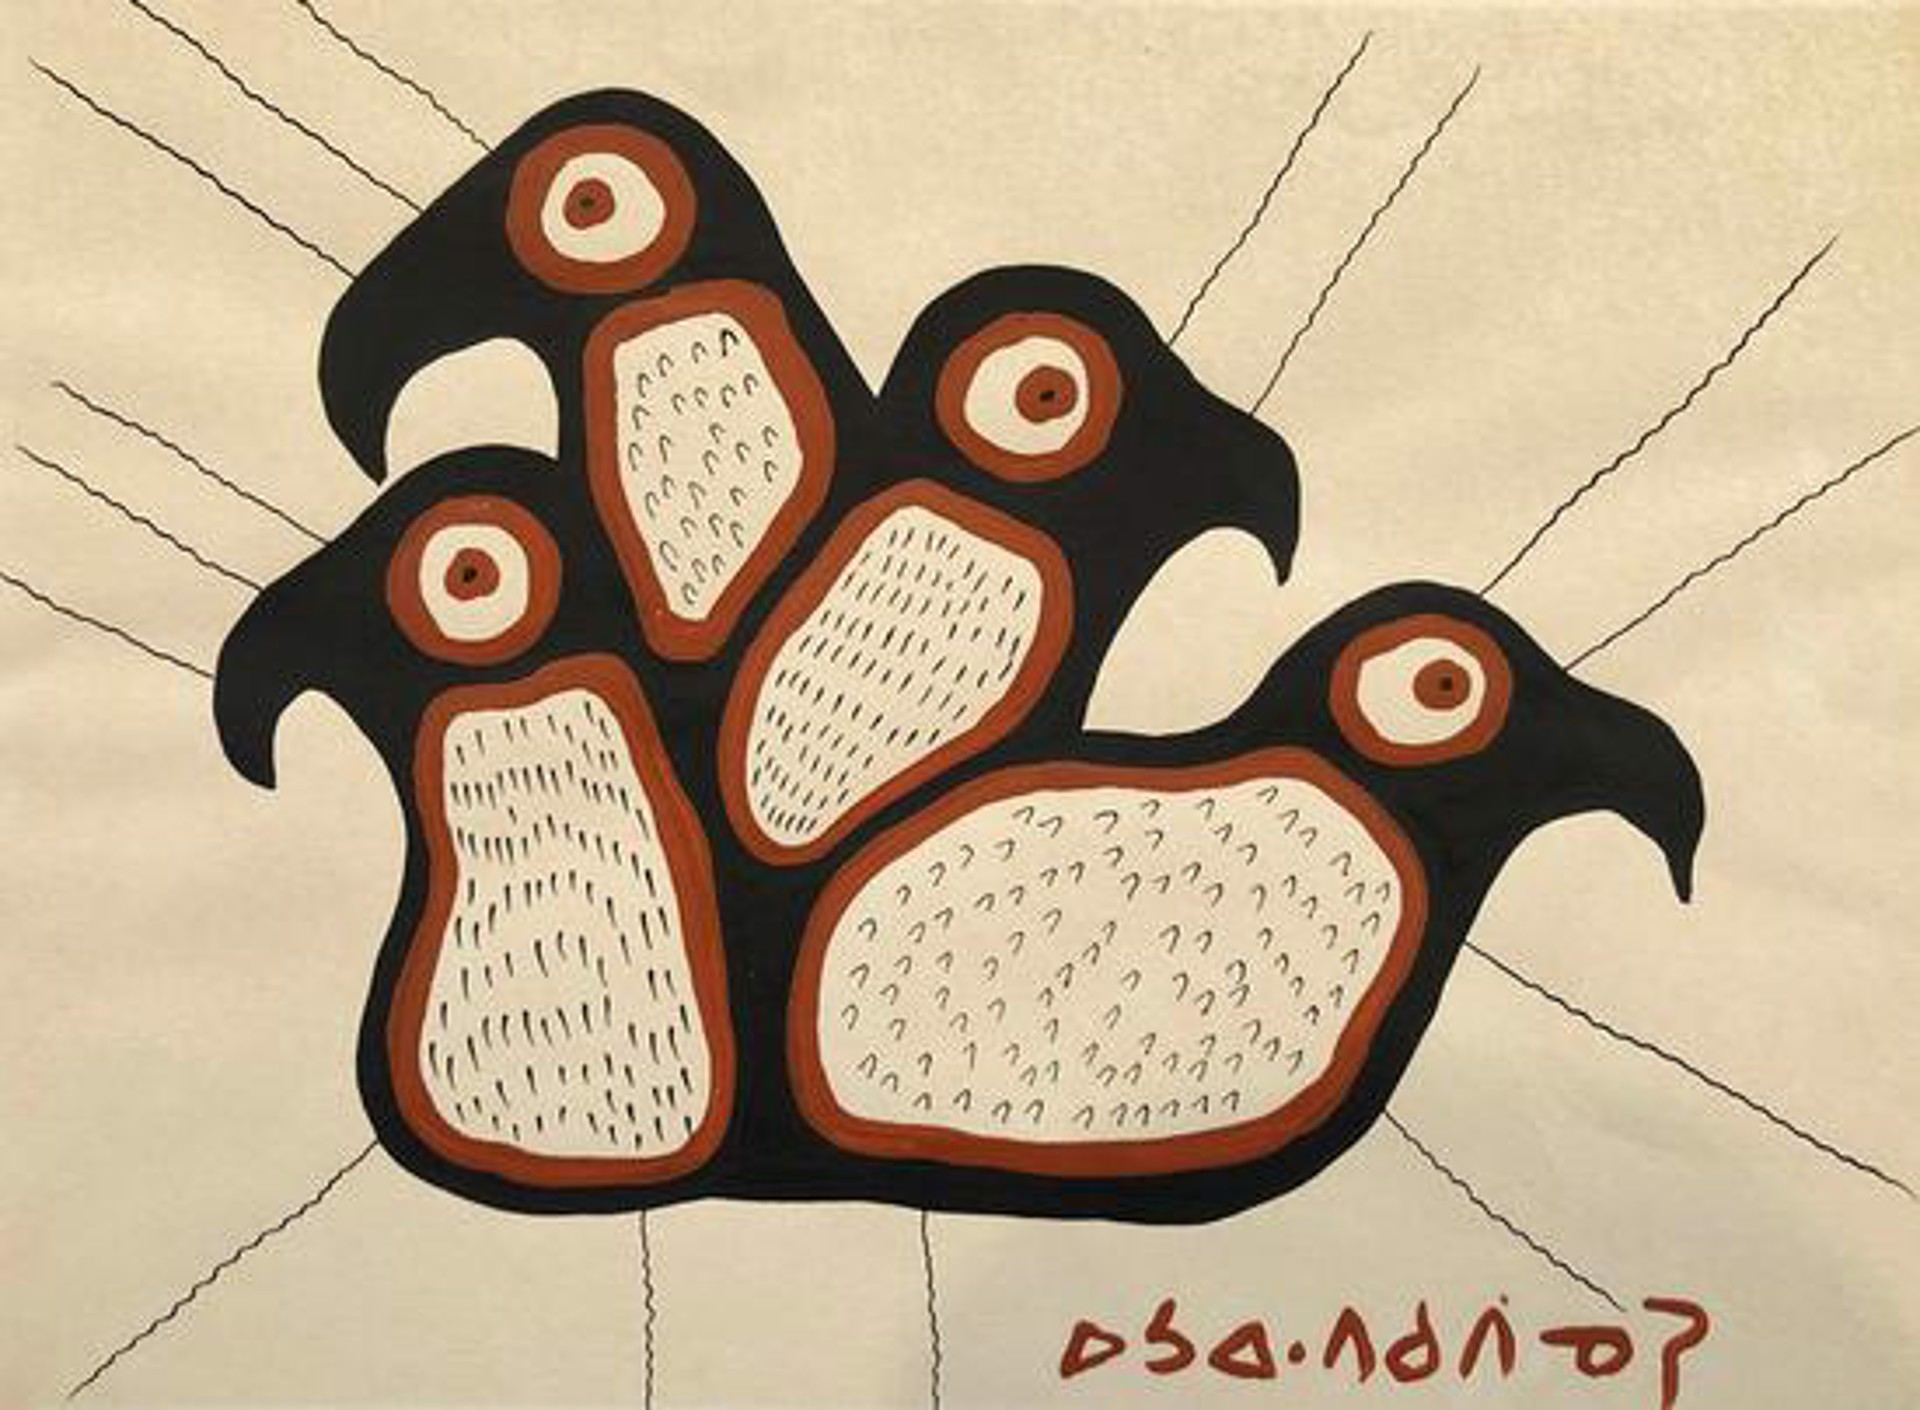 Untitled (Loons) by Norval Morrisseau (1931-2007)